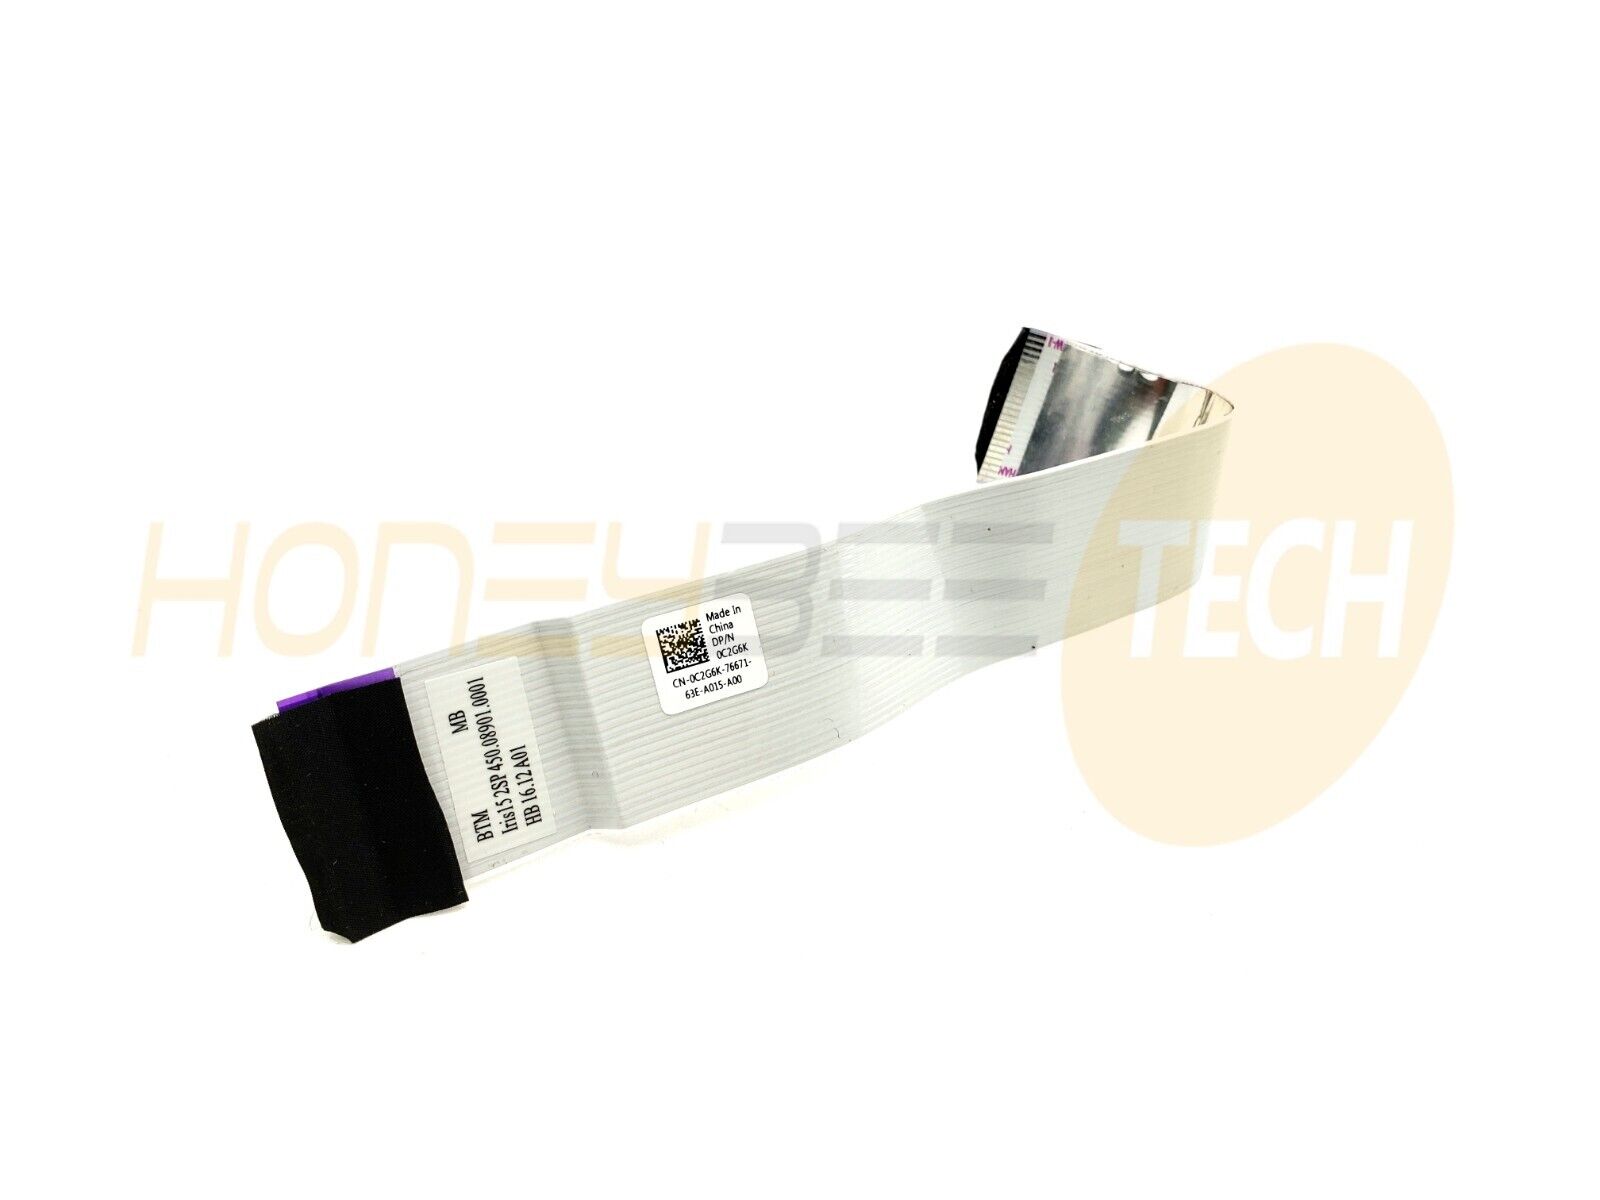 GENUINE DELL INSPIRON 15 3558 RIBBON CABLE FOR USB AUDIO BOARD C2G6K TESTED